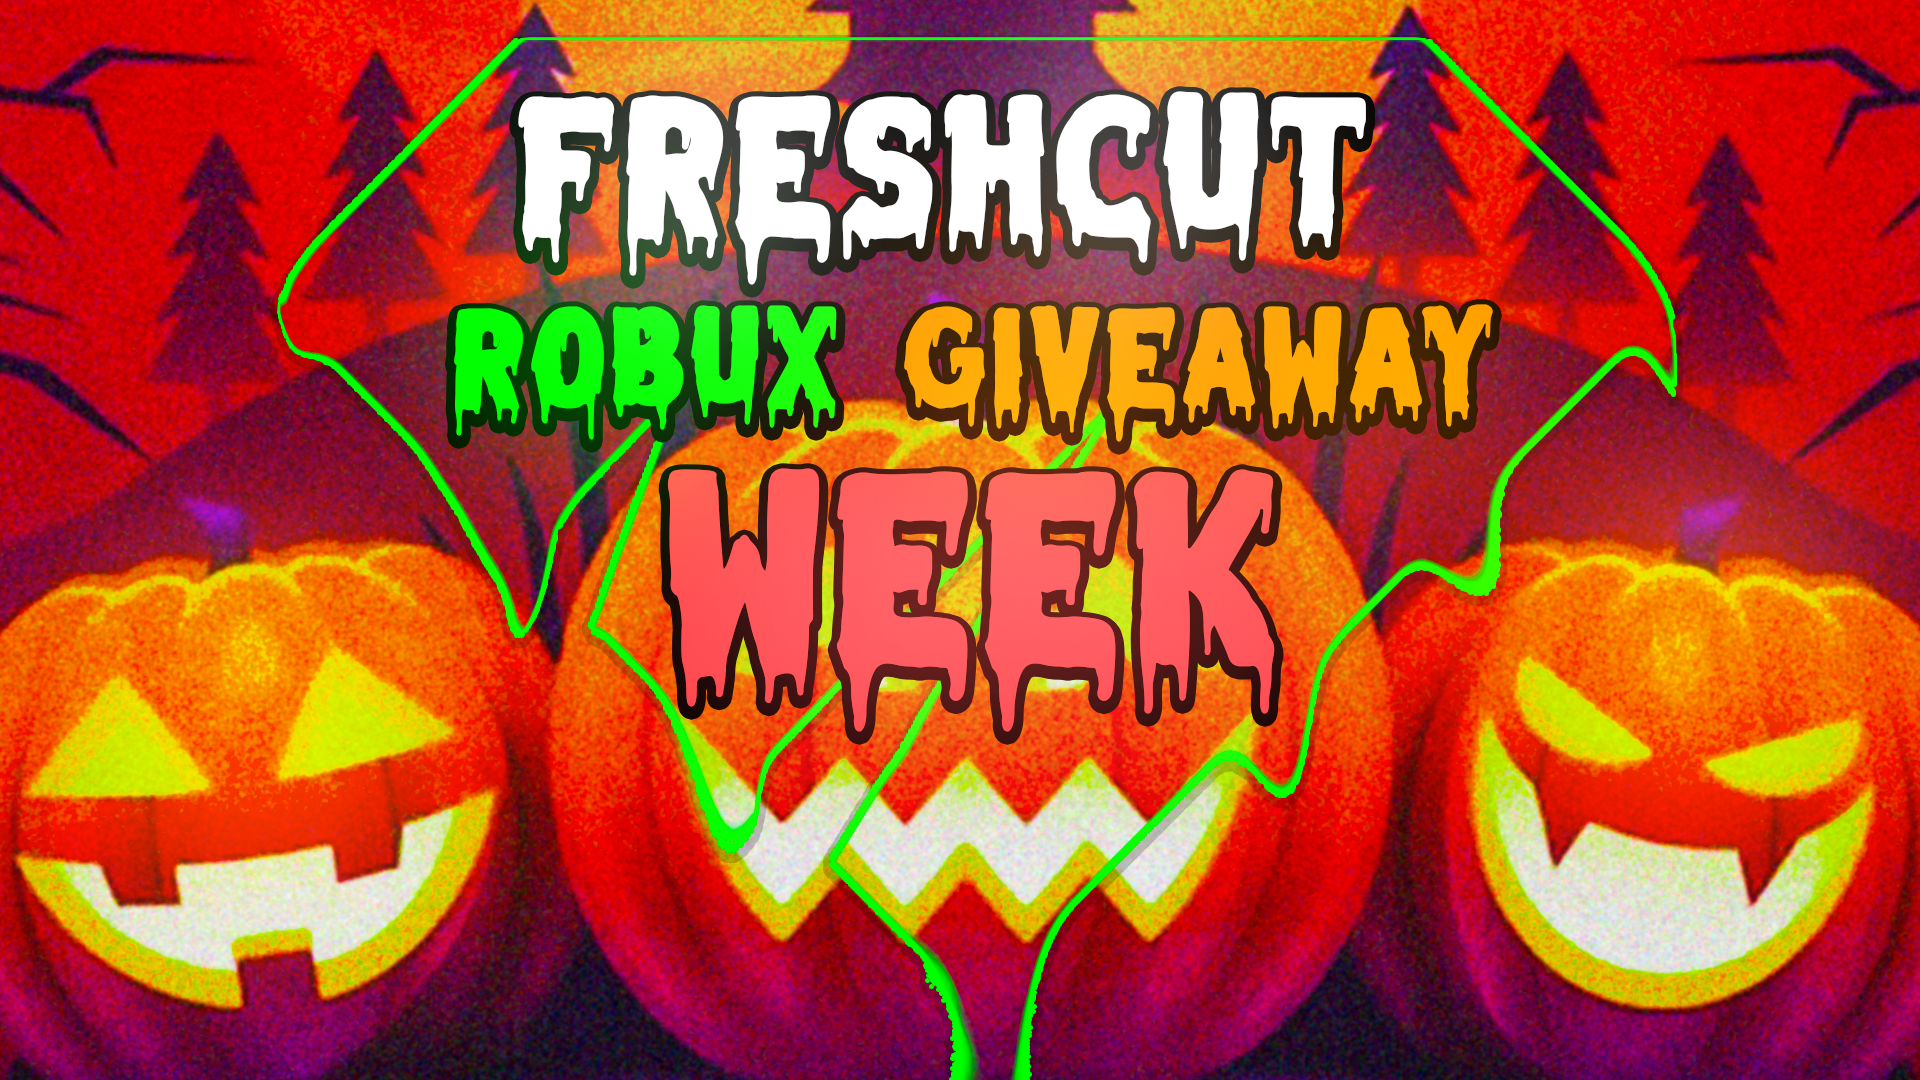 Announcing the FreshCut Robux Giveaway Week: A Week Full of Challenges and Robux Rewards!